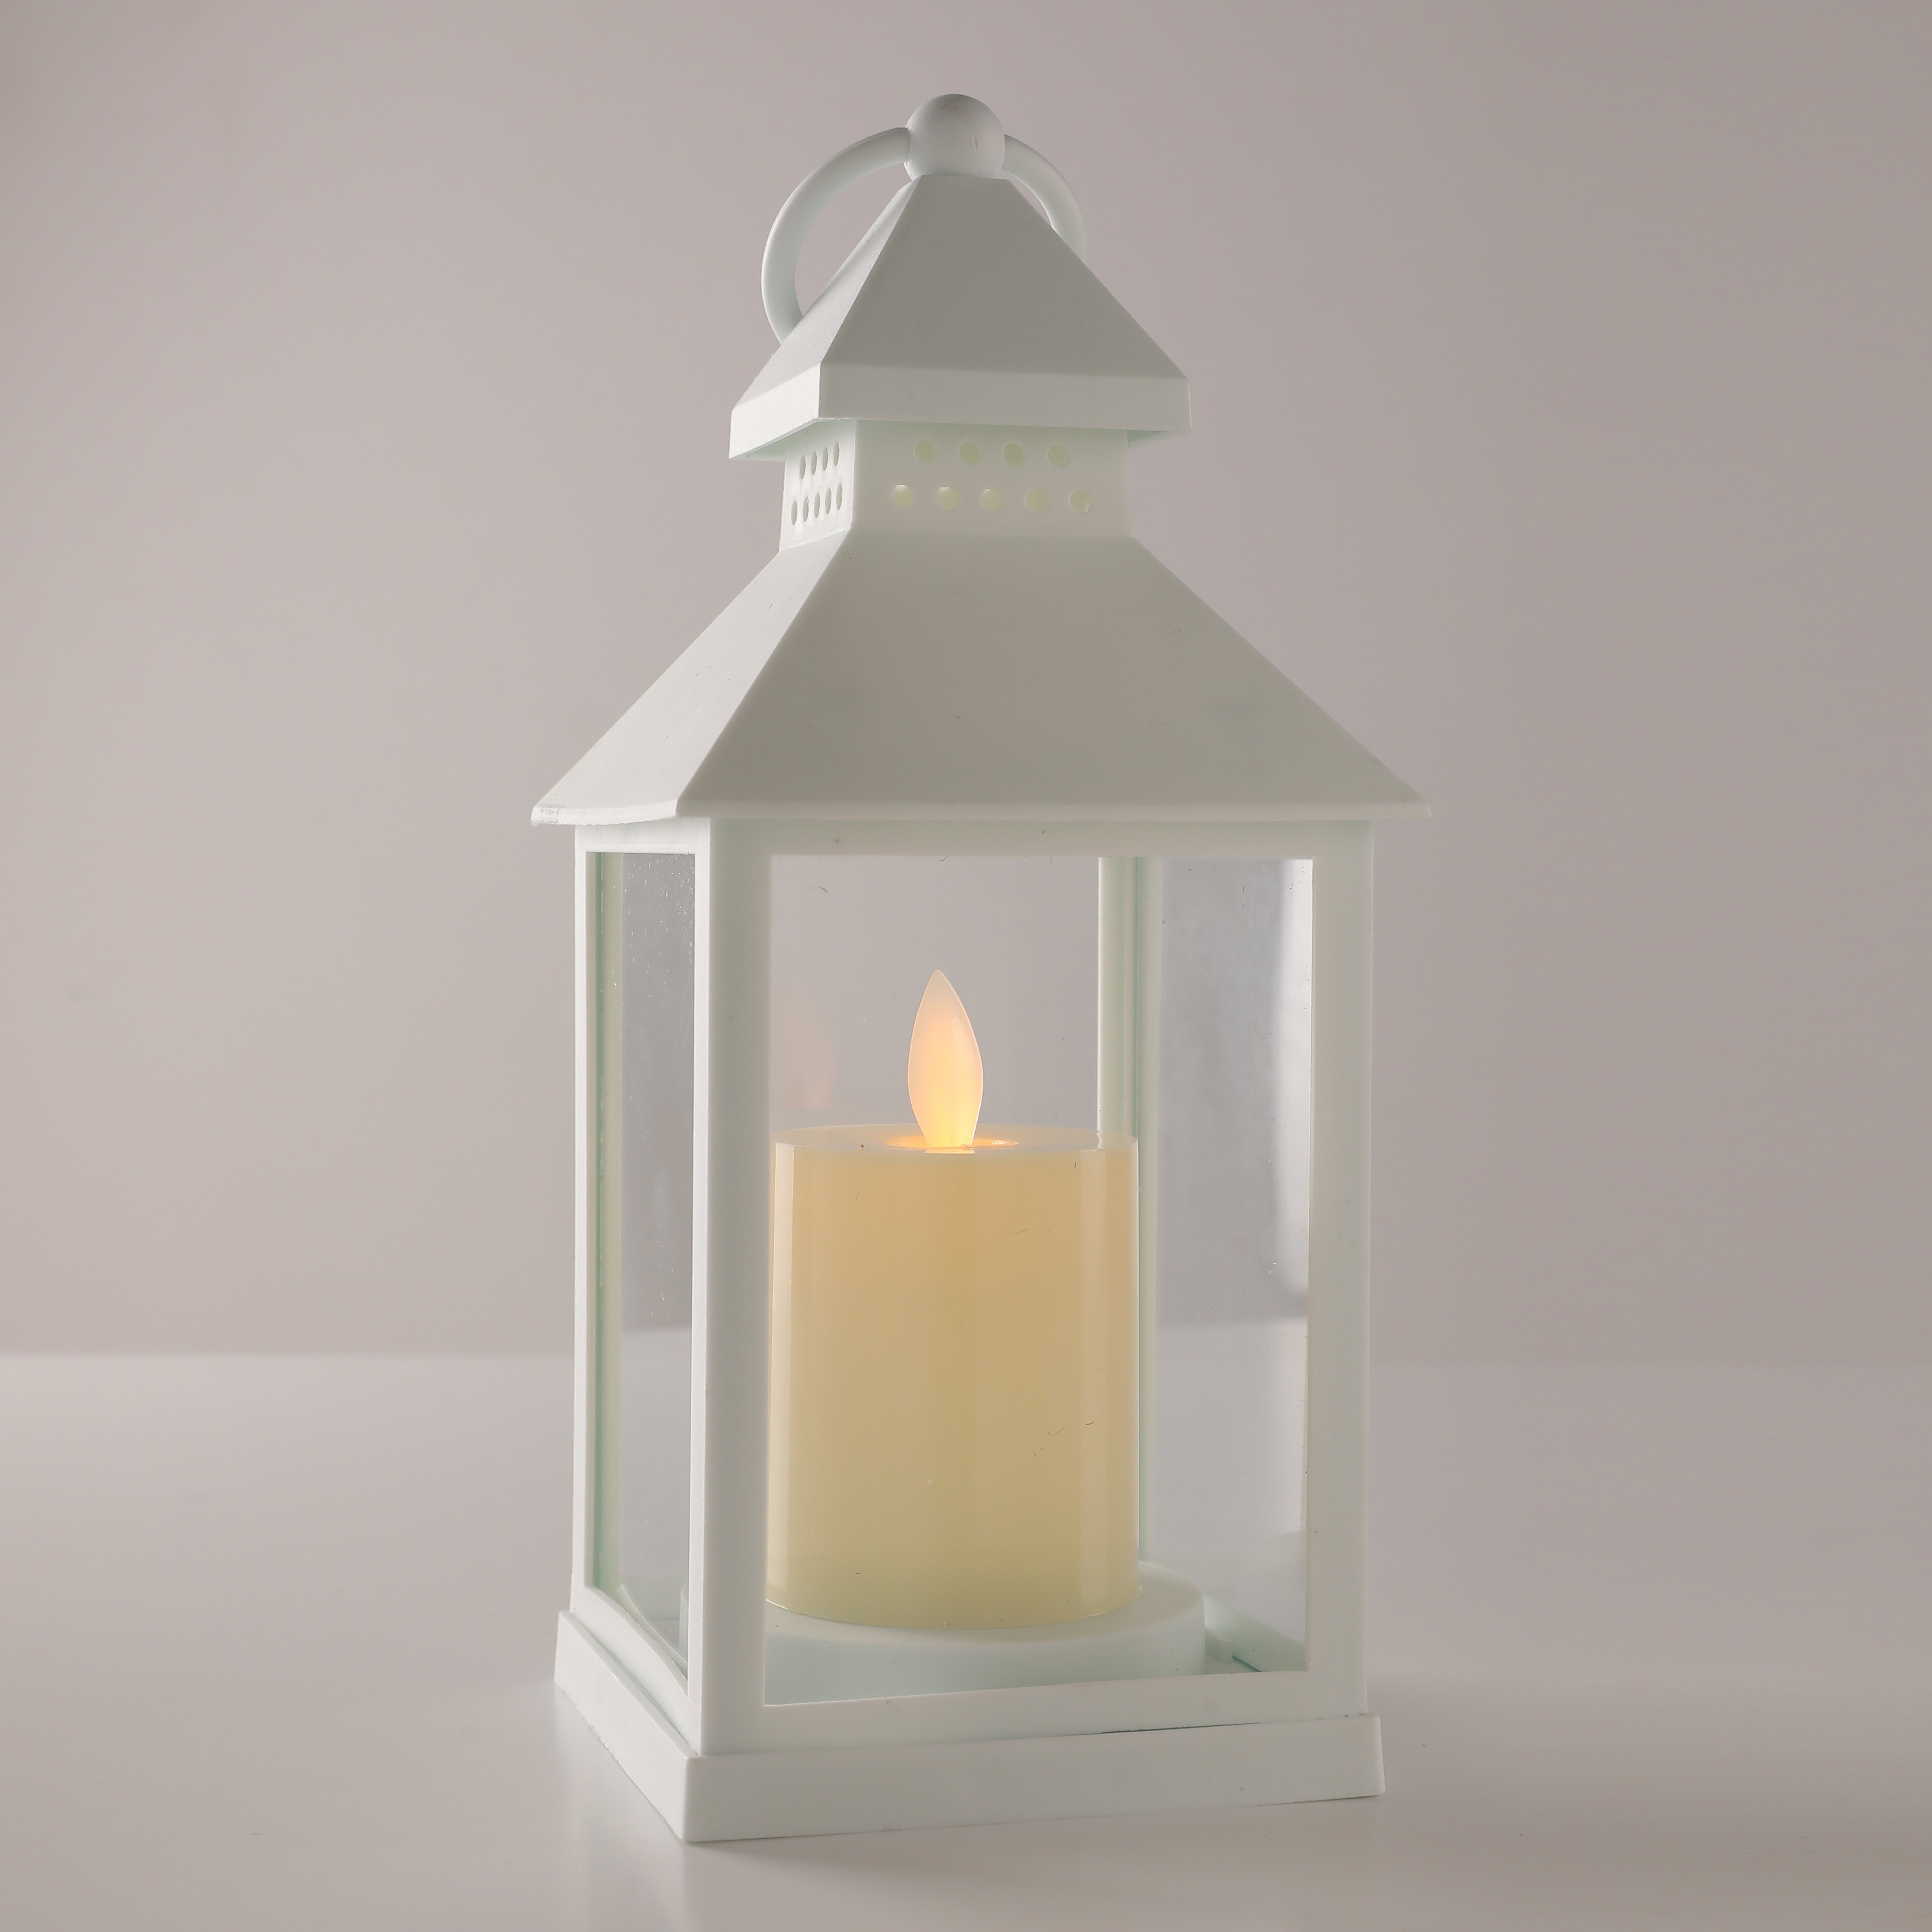 Decorative Lantern With Battery-powered Led Candle Light For